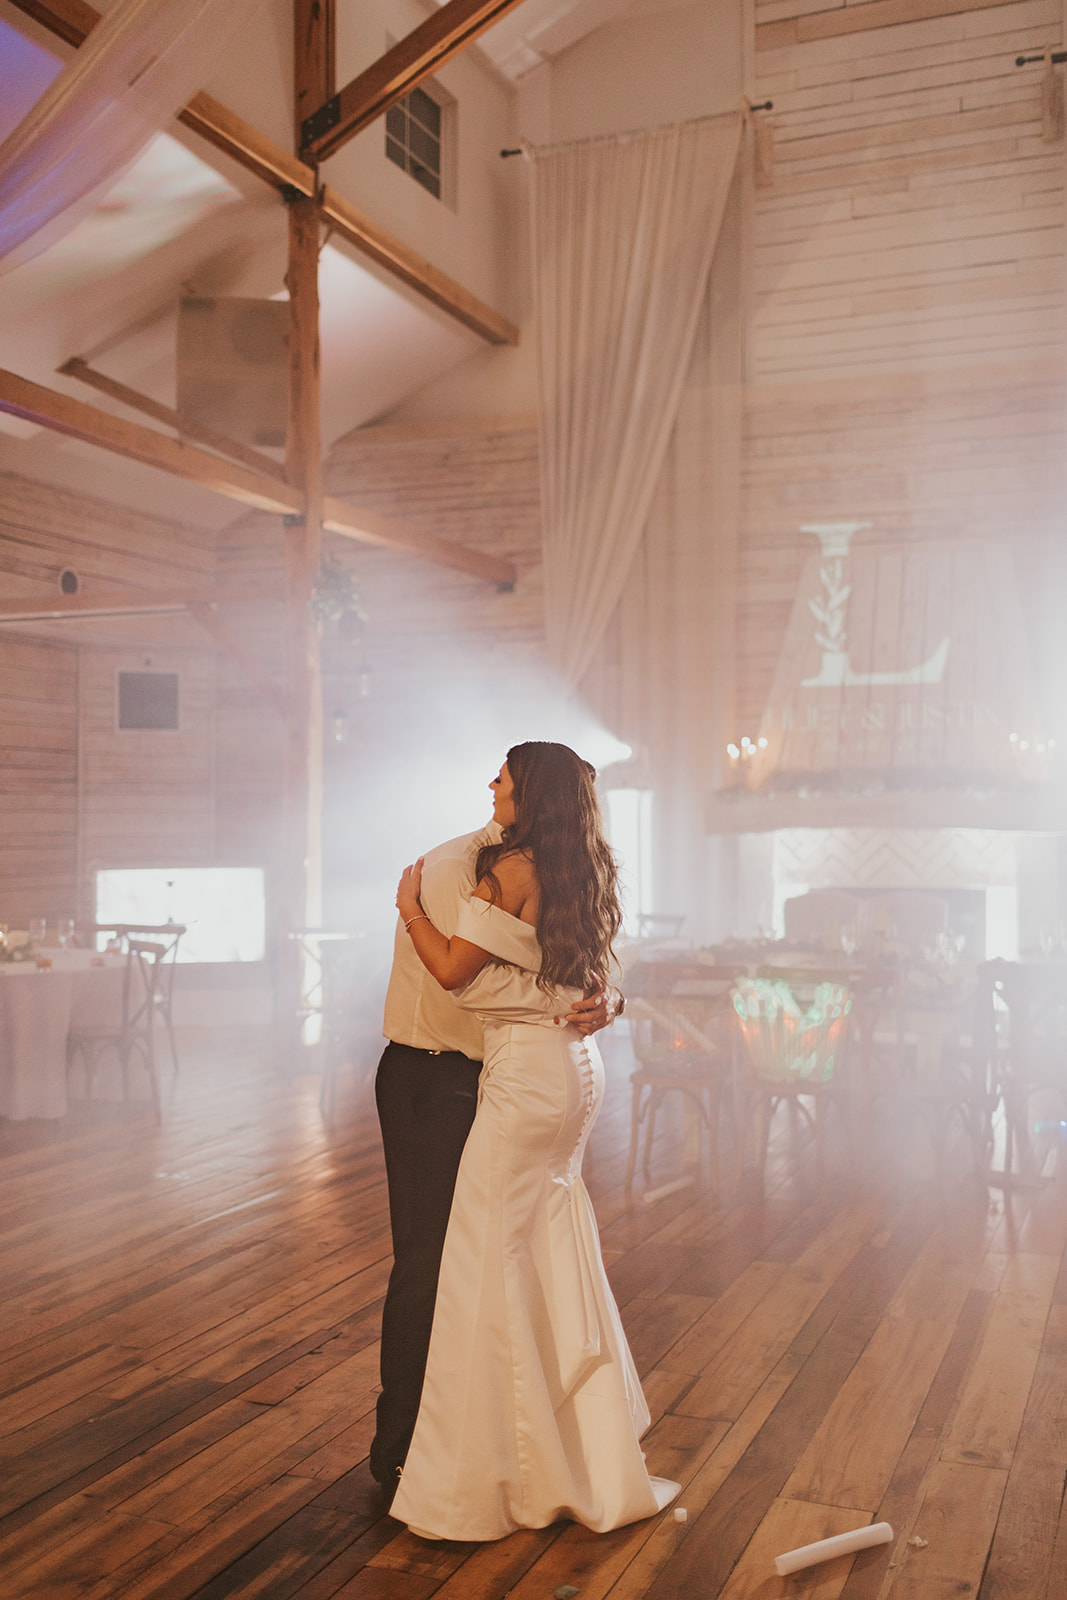 Bride and Groom share in a private last dance after their wedding day. 